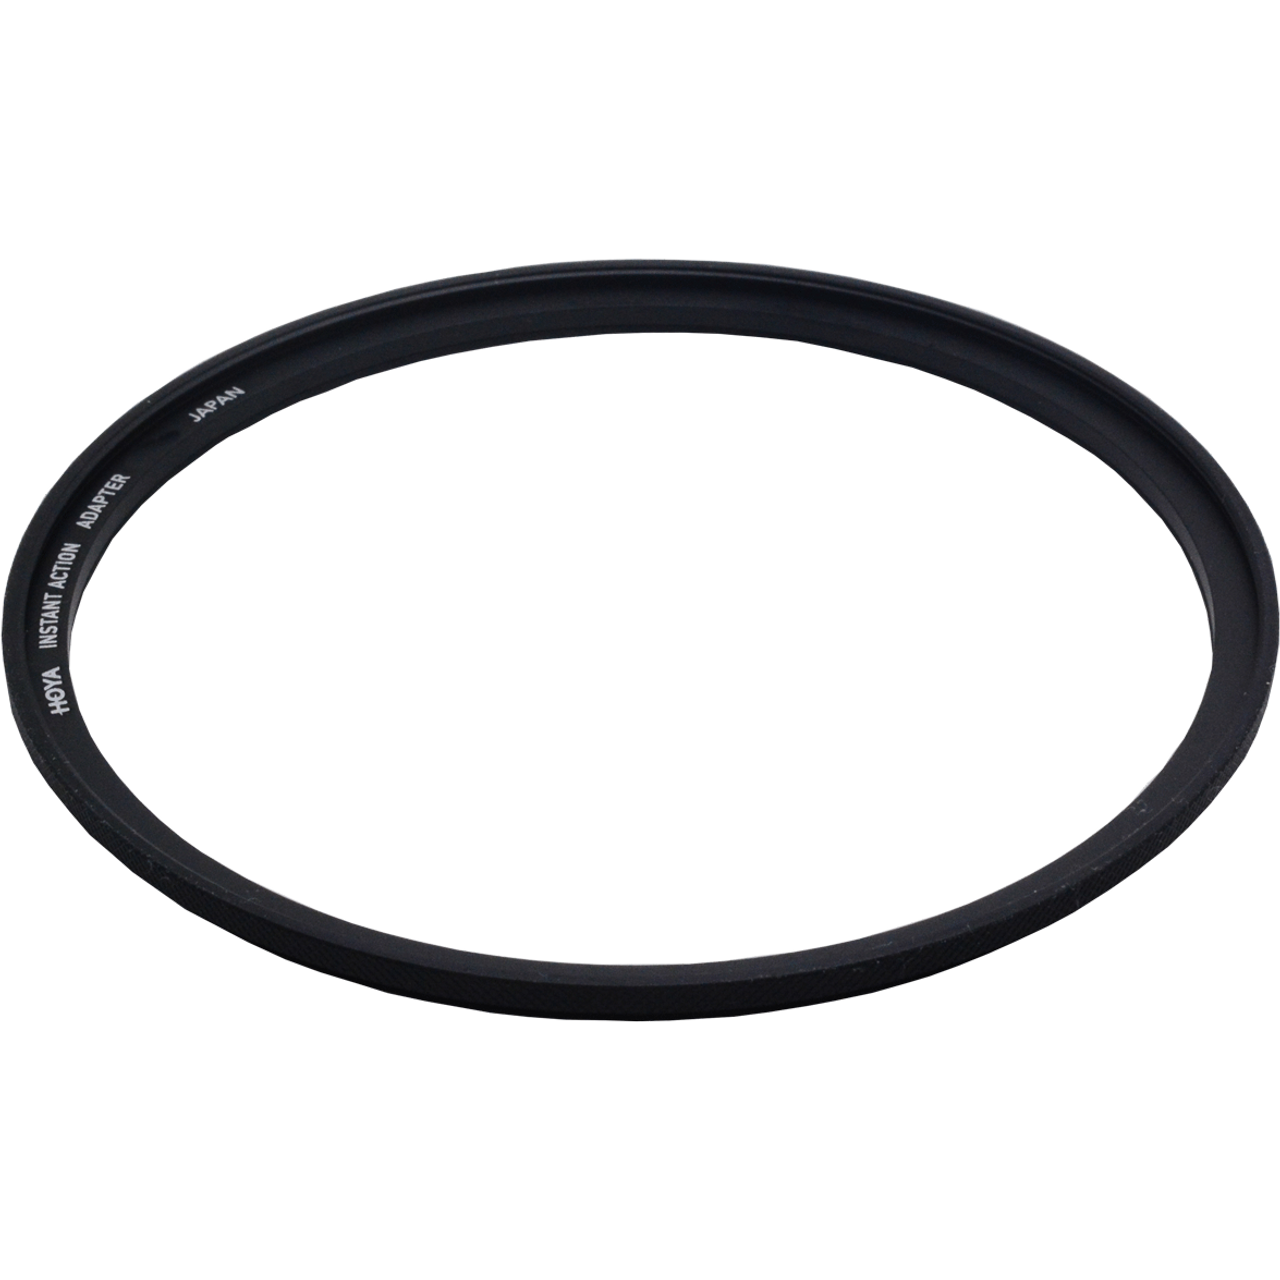 HOYA INSTANT ACTION ADAPTER RING (58MM)